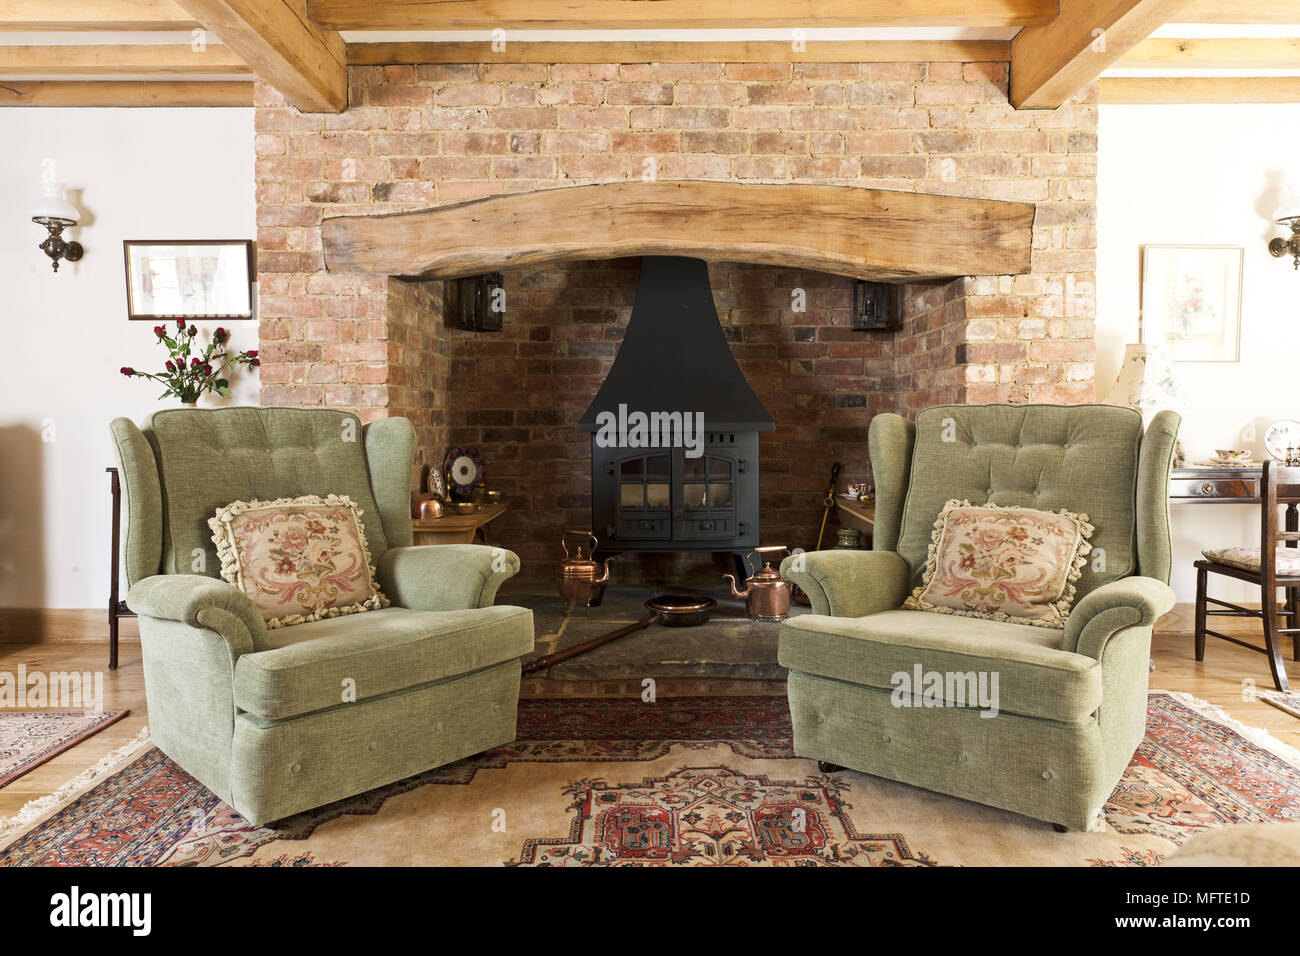 Two upholstered armchairs in front of country style fireplace Stock Photo